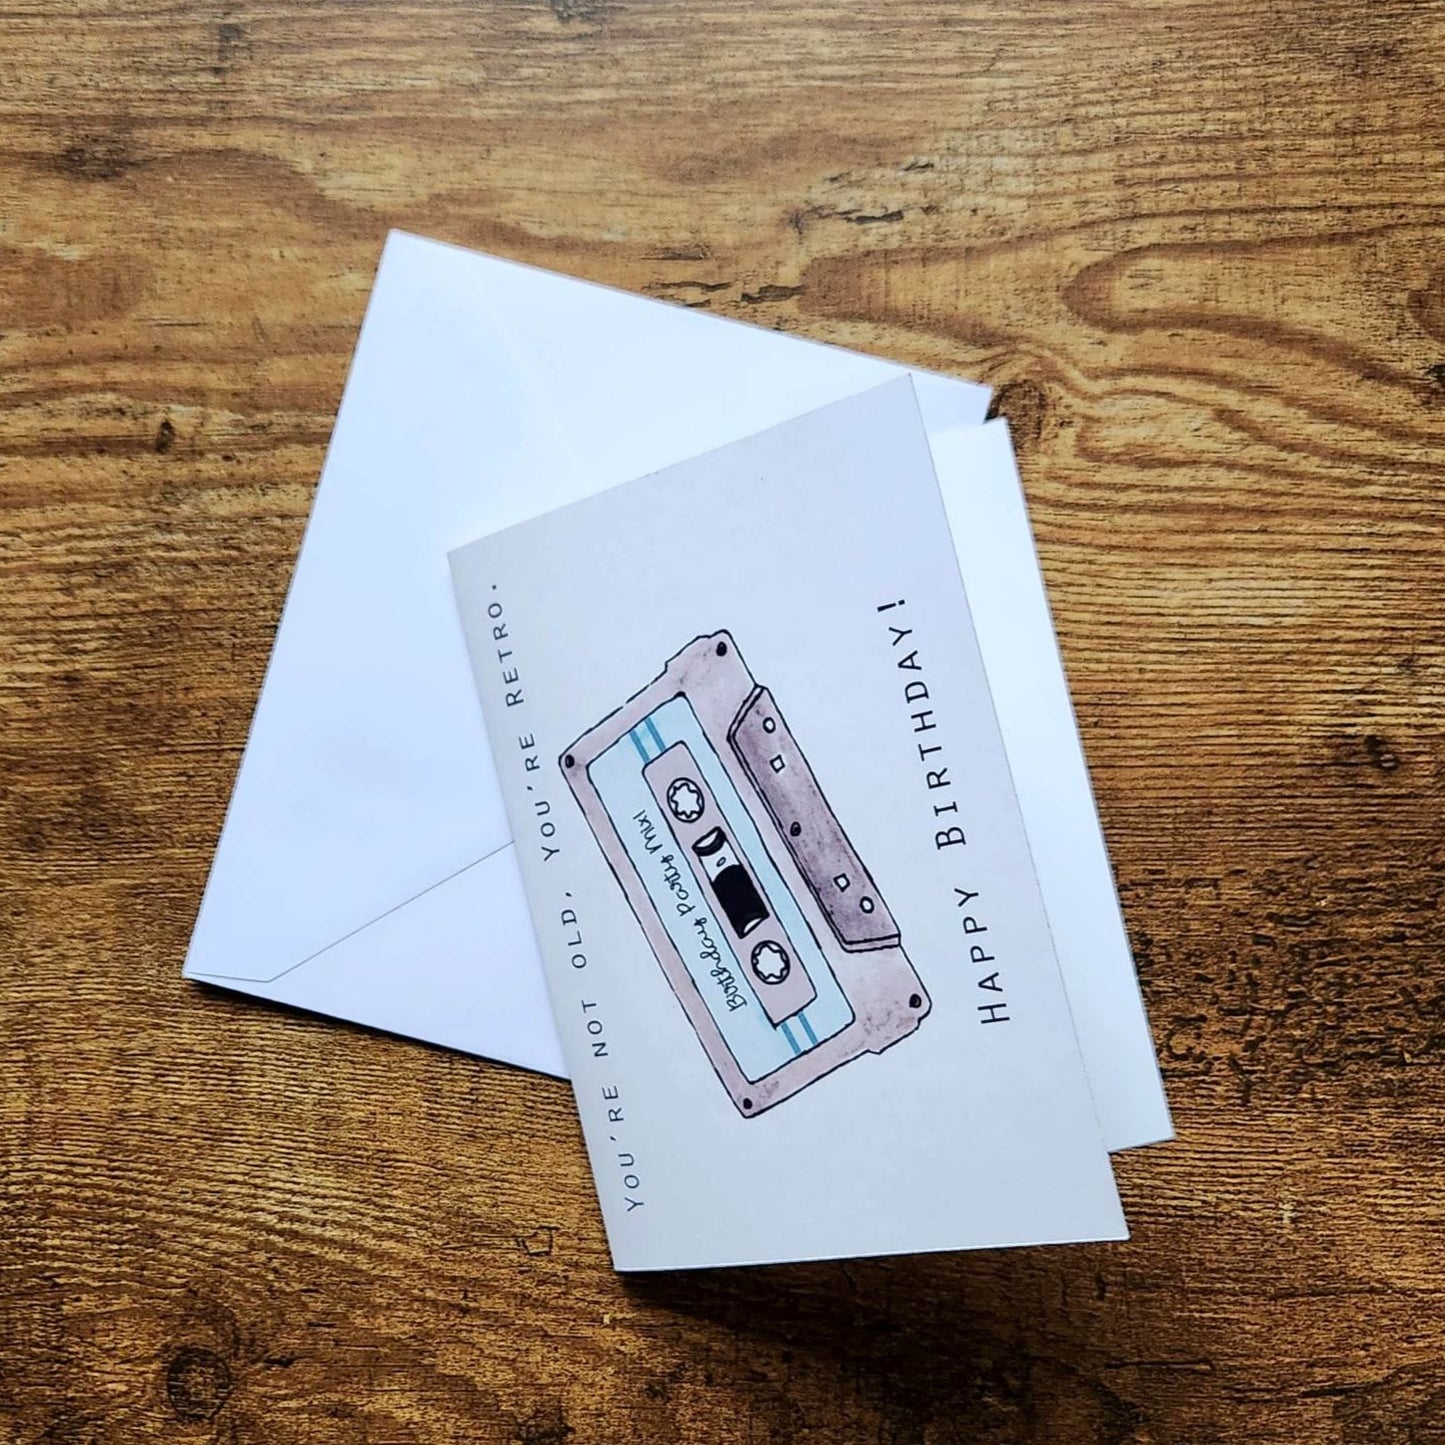 Retro cassette birthday card, You're not old You're retro, Happy Birthday card, Mix tape birthday card, Music birthday card, Vintage card